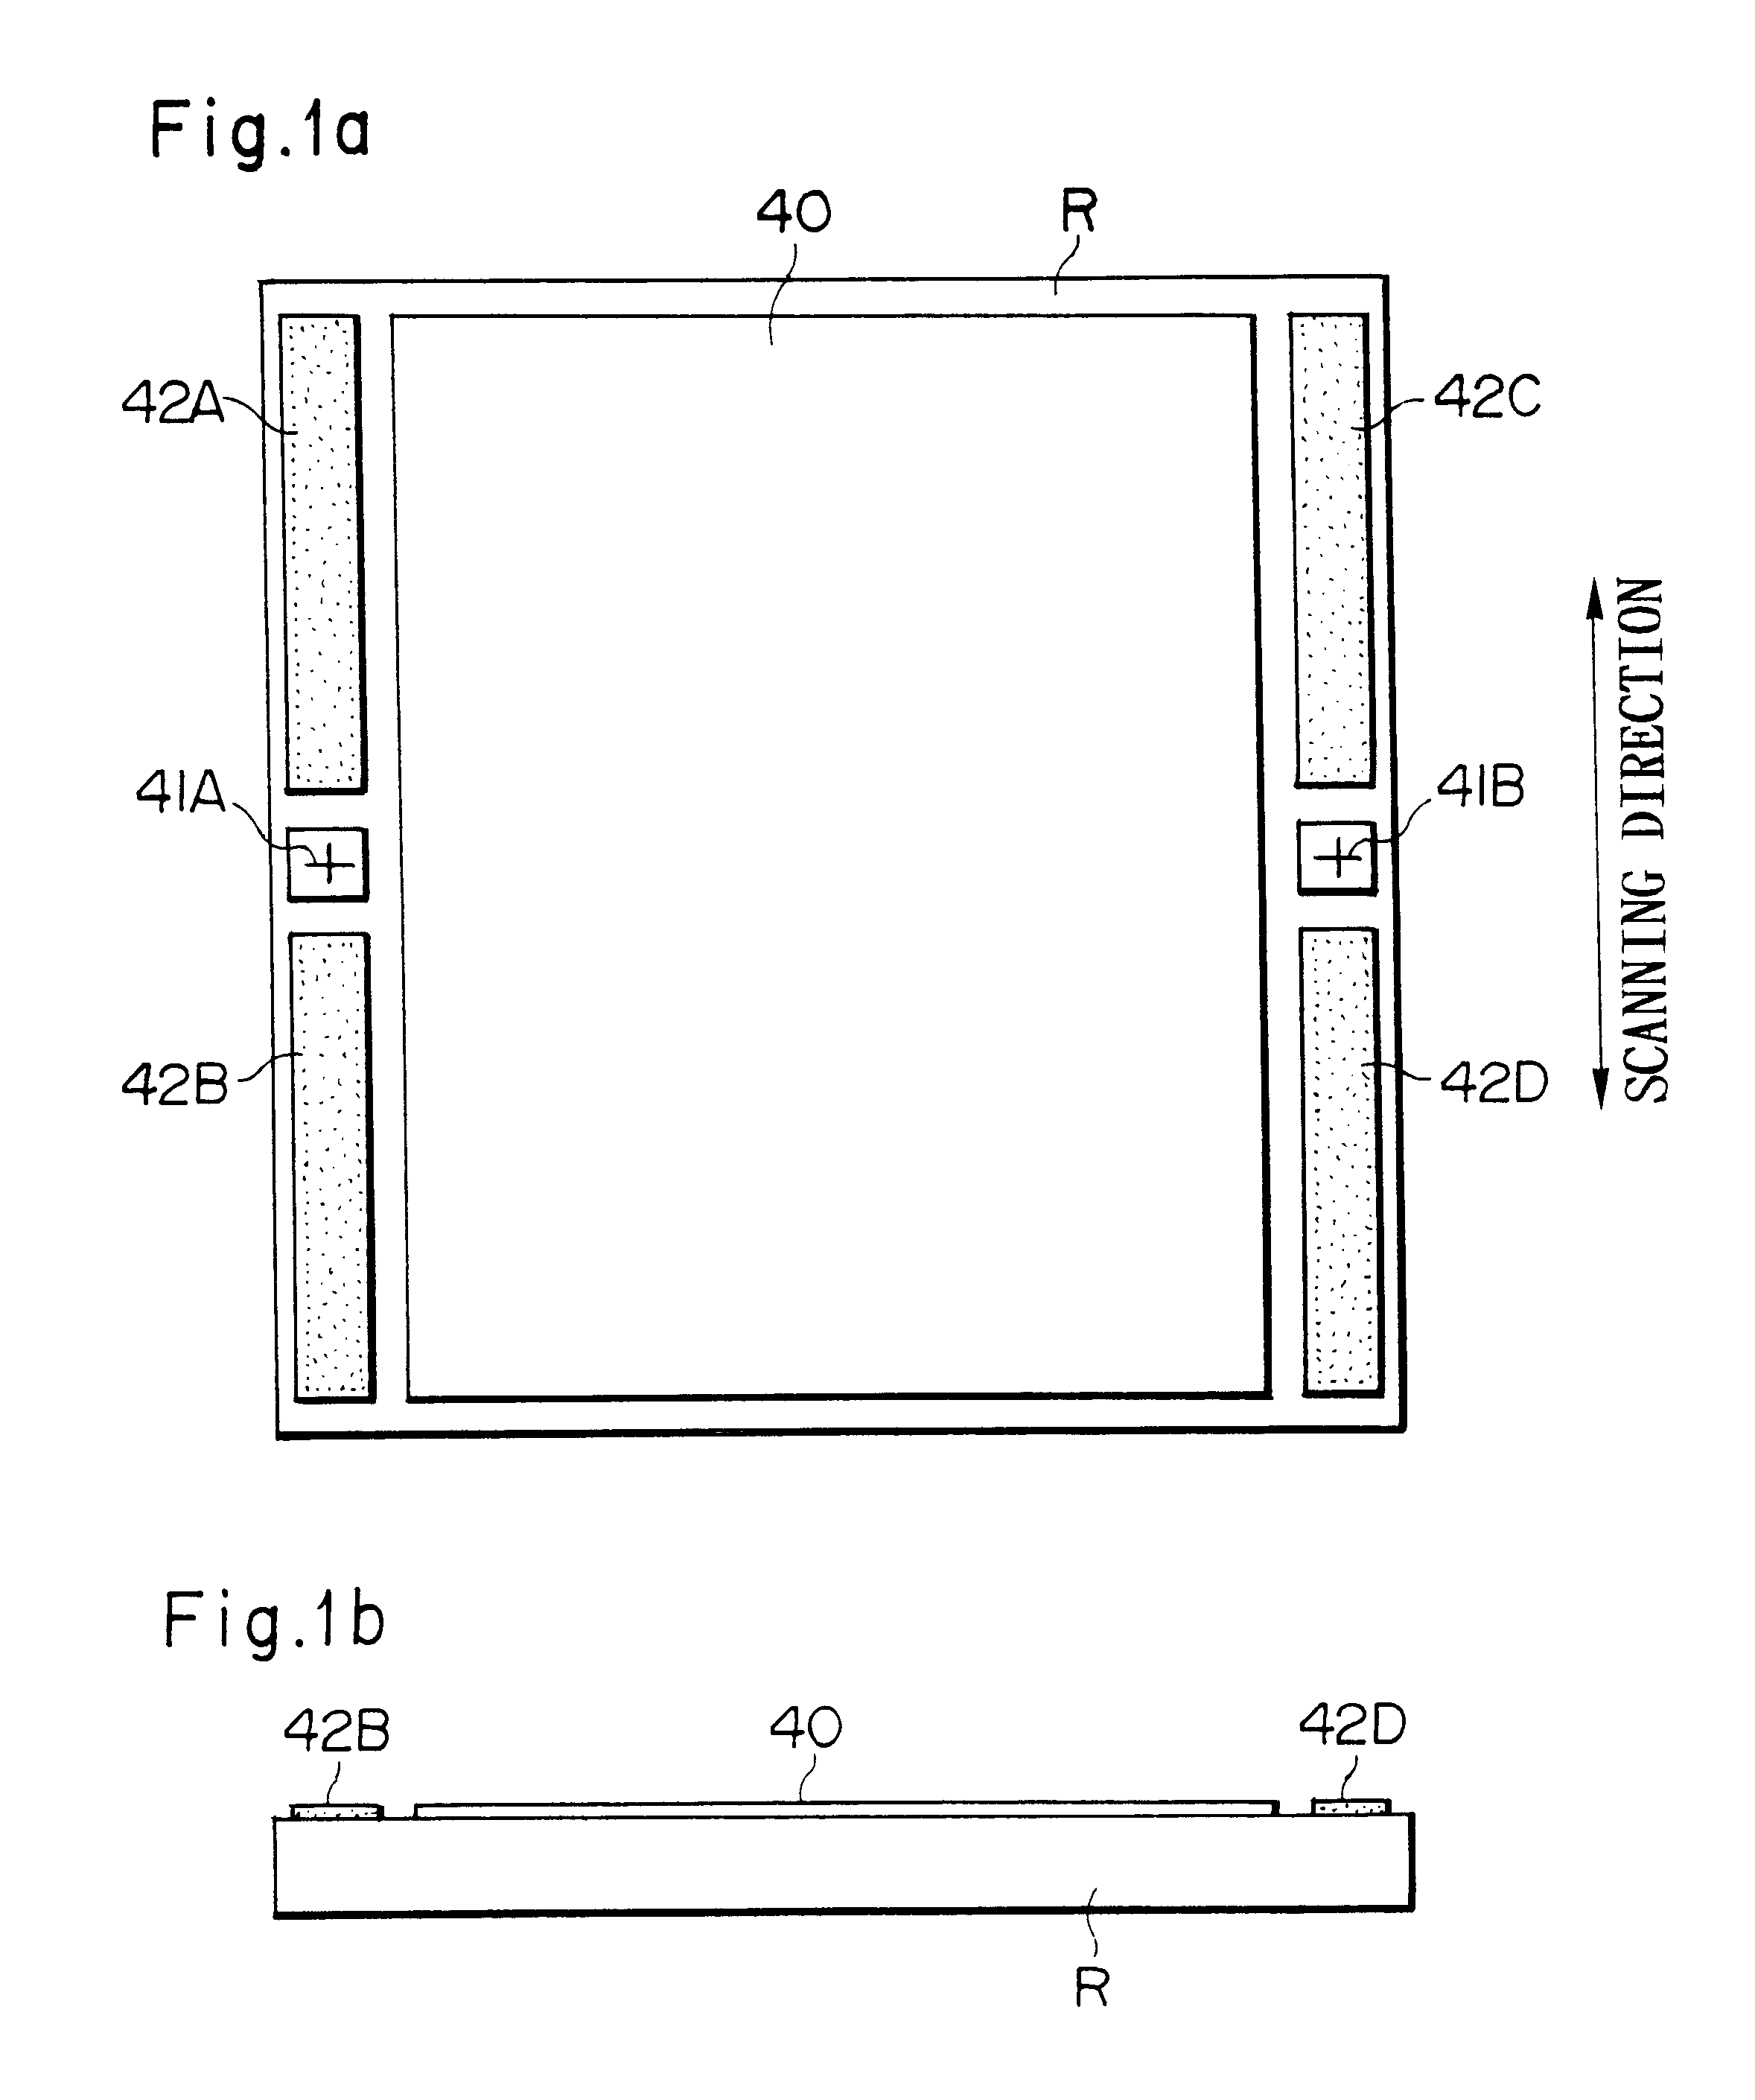 Photomask, aberration correction plate, exposure apparatus, and process of production of microdevice